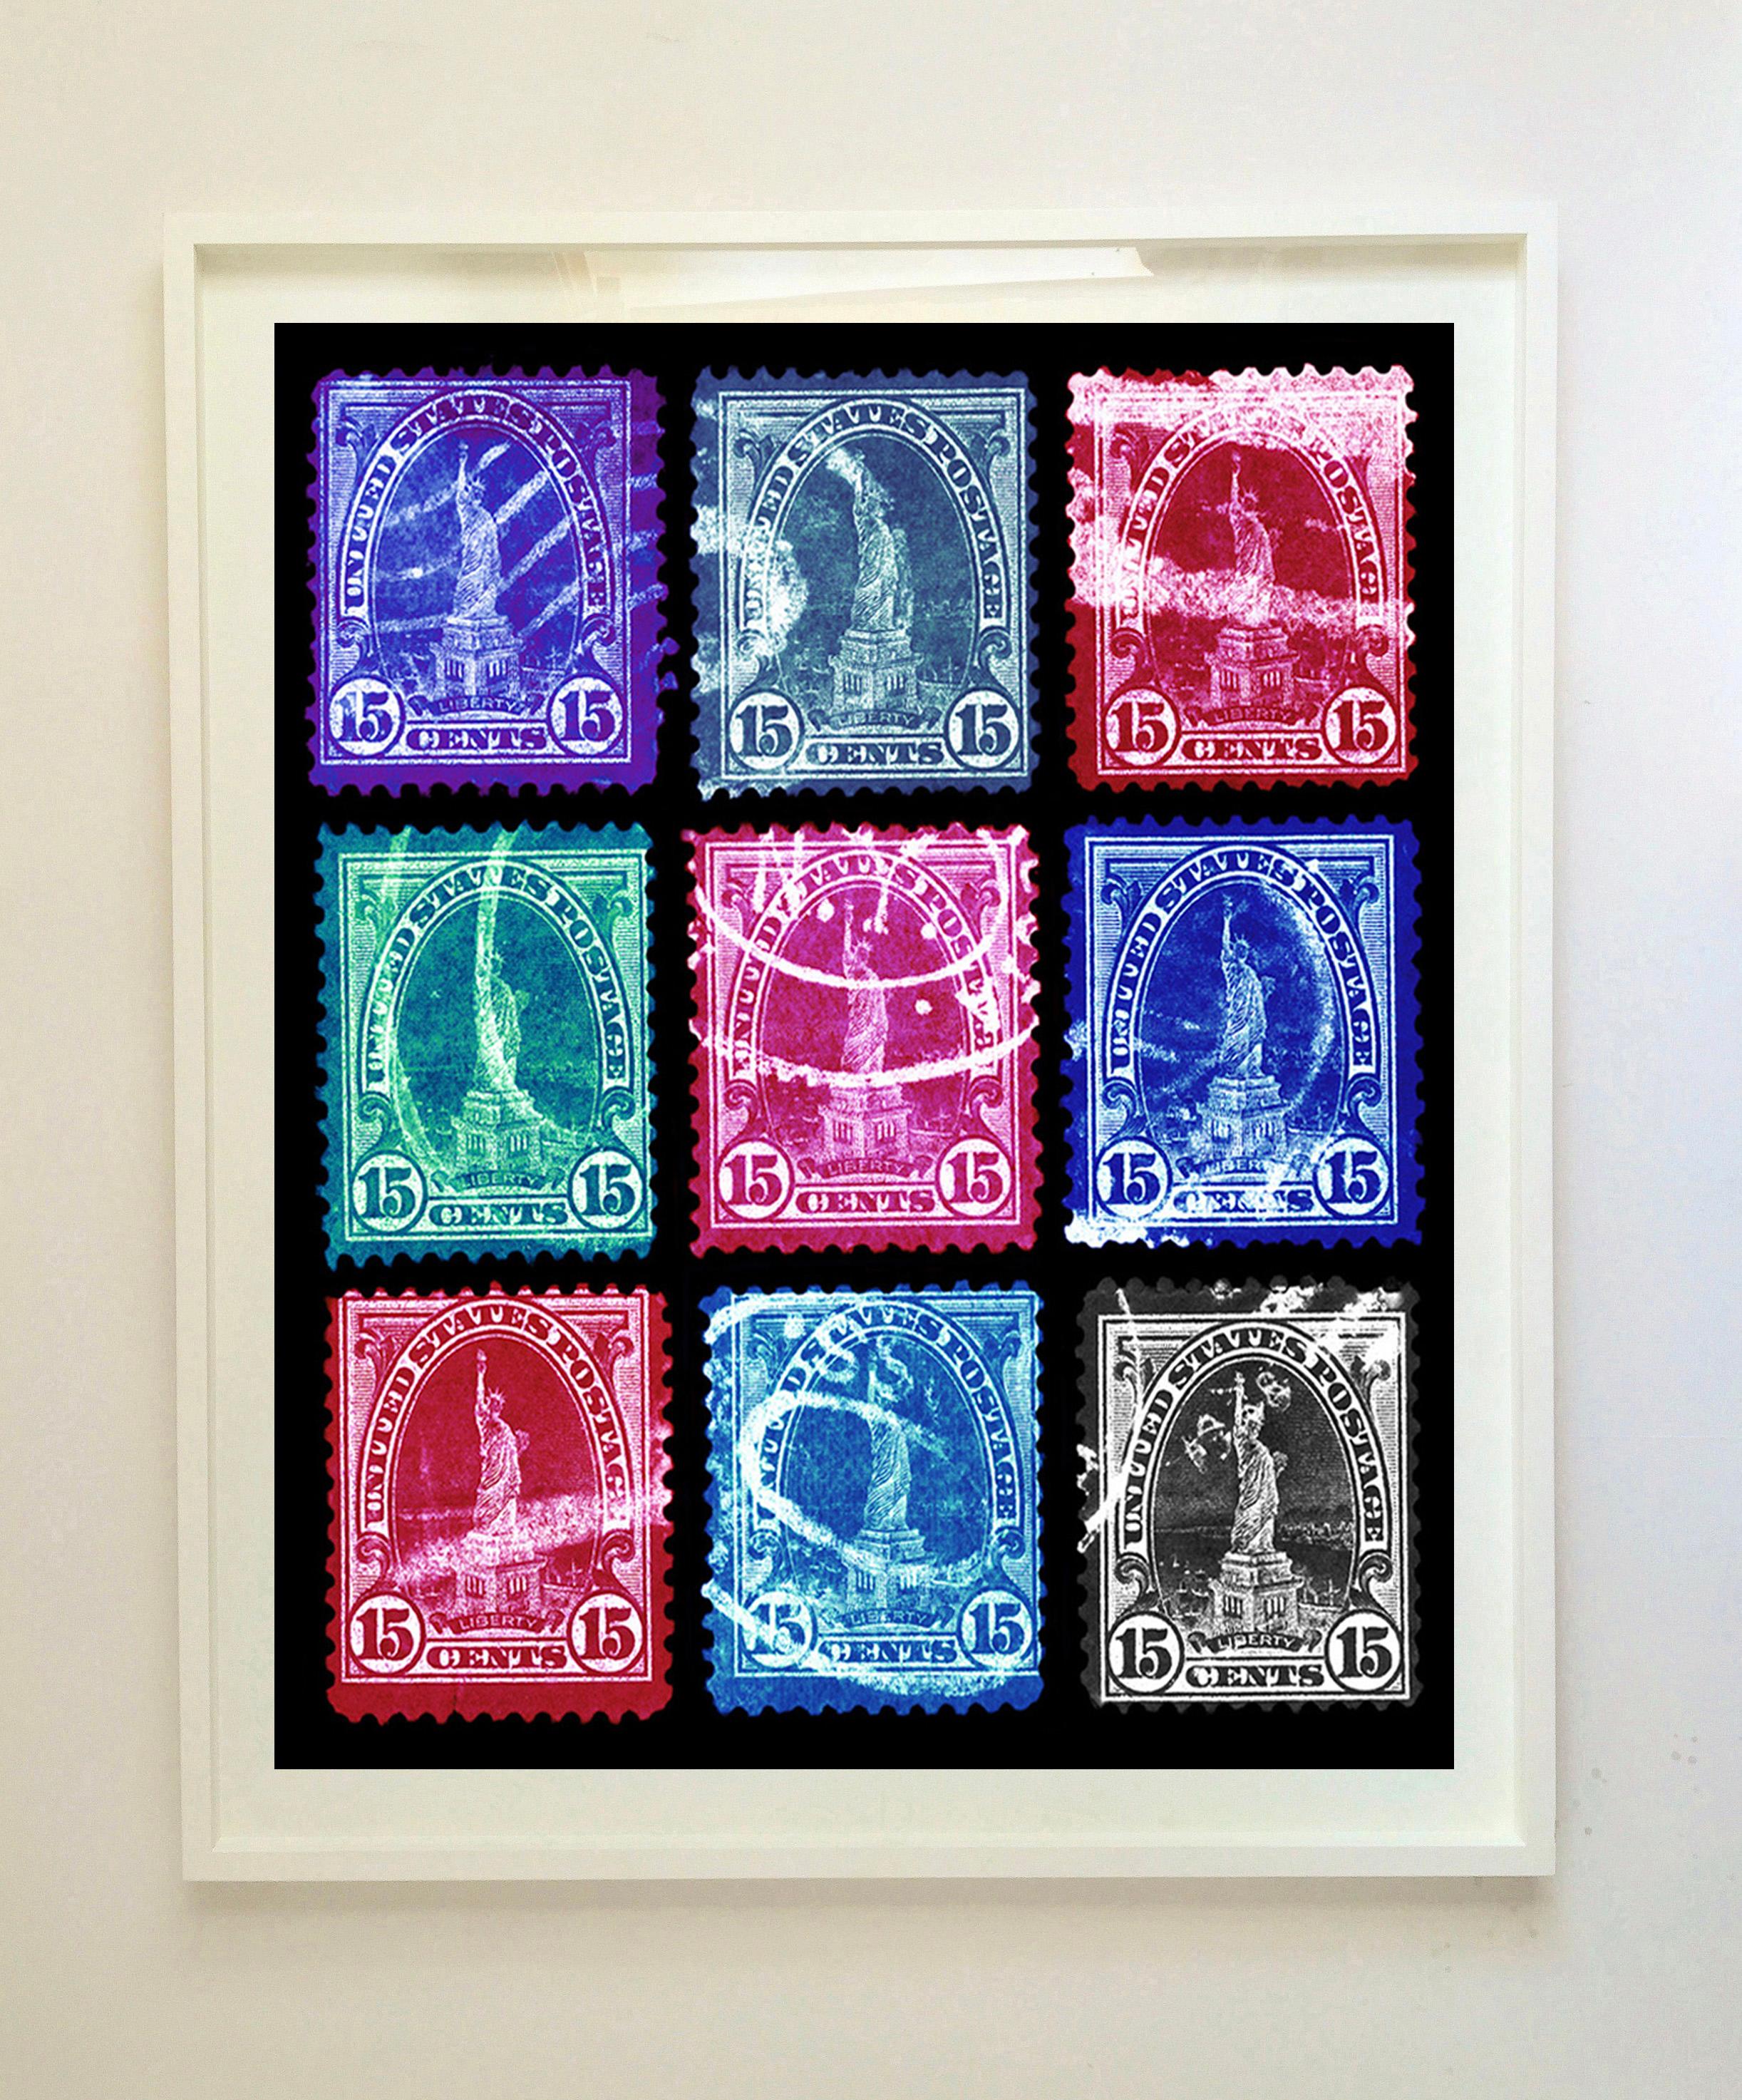 Stamp Collection, Liberty (Multi-Colour Mosaic) - Pop Art Color Photography - Print by Heidler & Heeps